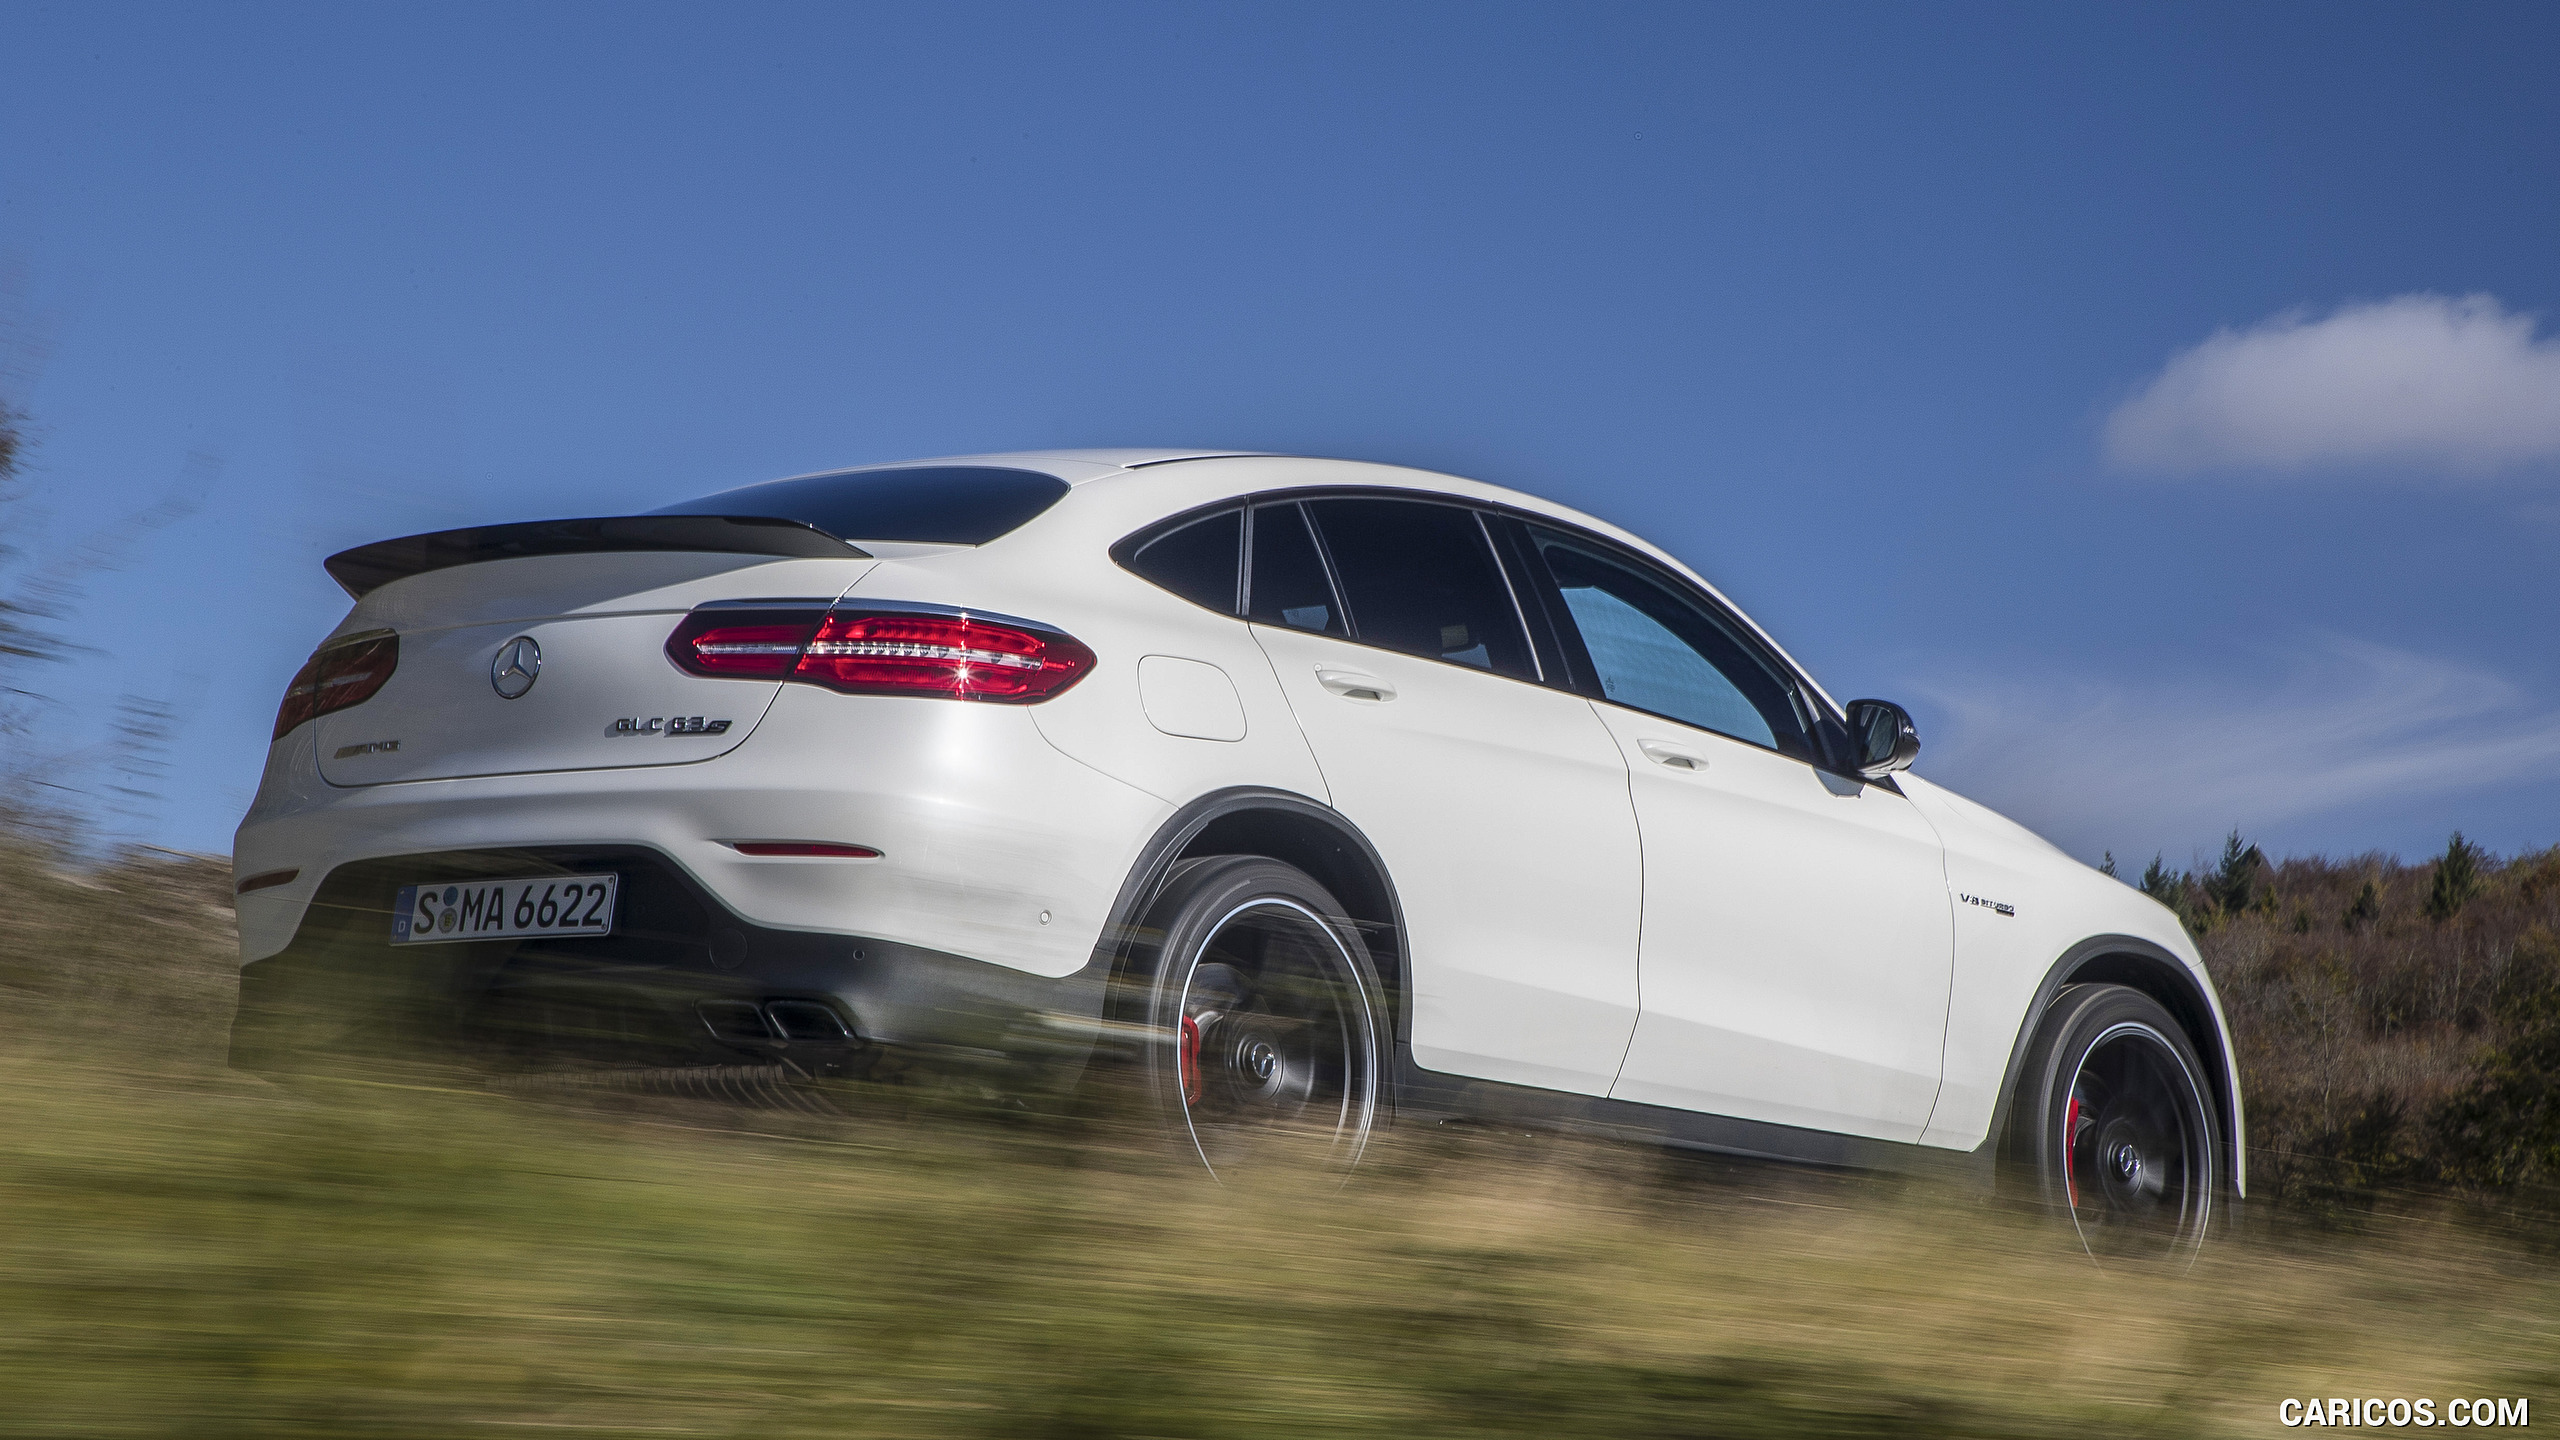 2018 Mercedes-AMG GLC 63 S Coupe - Rear Three-Quarter, #36 of 75